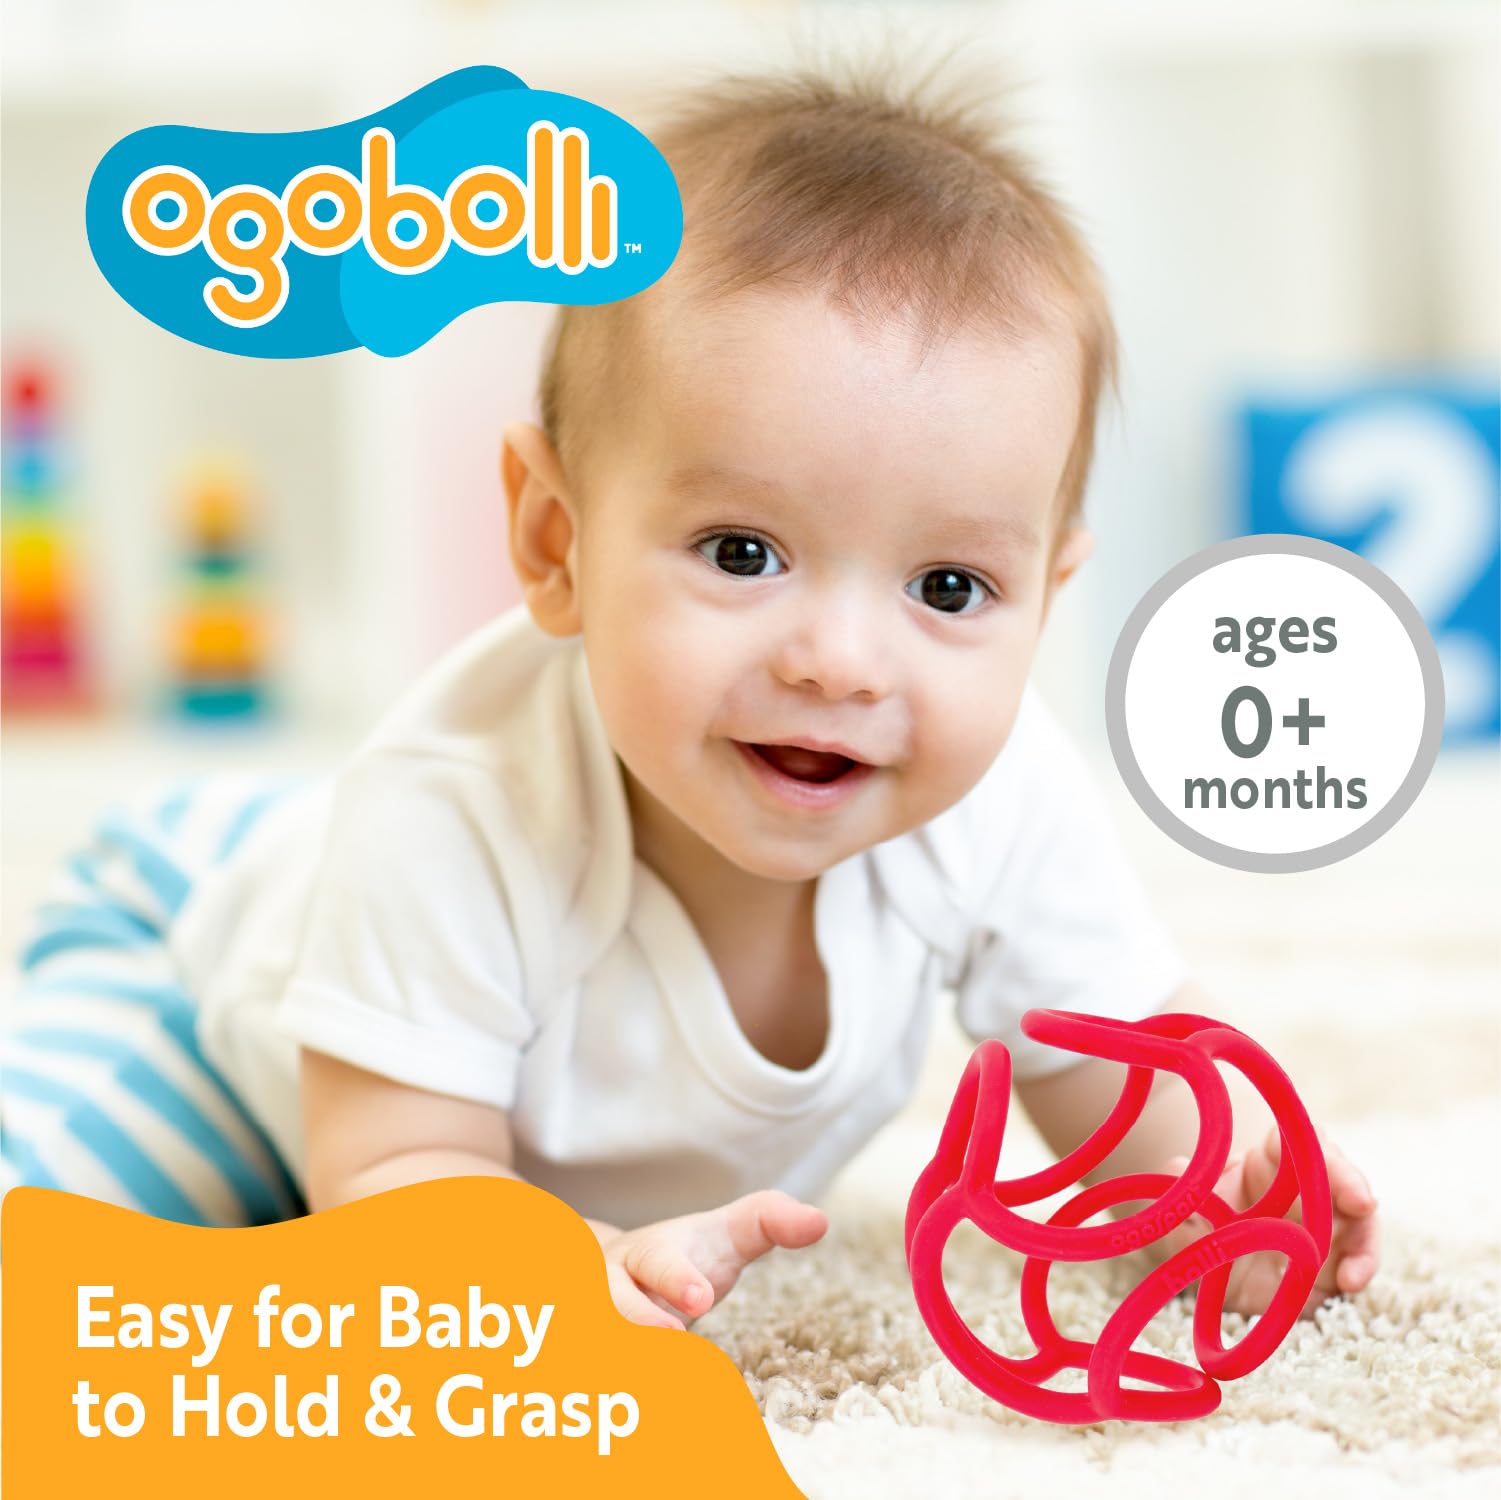 OgoBolli Teether Ring Tactile Sensory Ball Toy for Babies & Toddlers - Stretchy, Squishy, Soft, Non-Toxic Silicone - Boys and Girls Age 6+ Months - Red